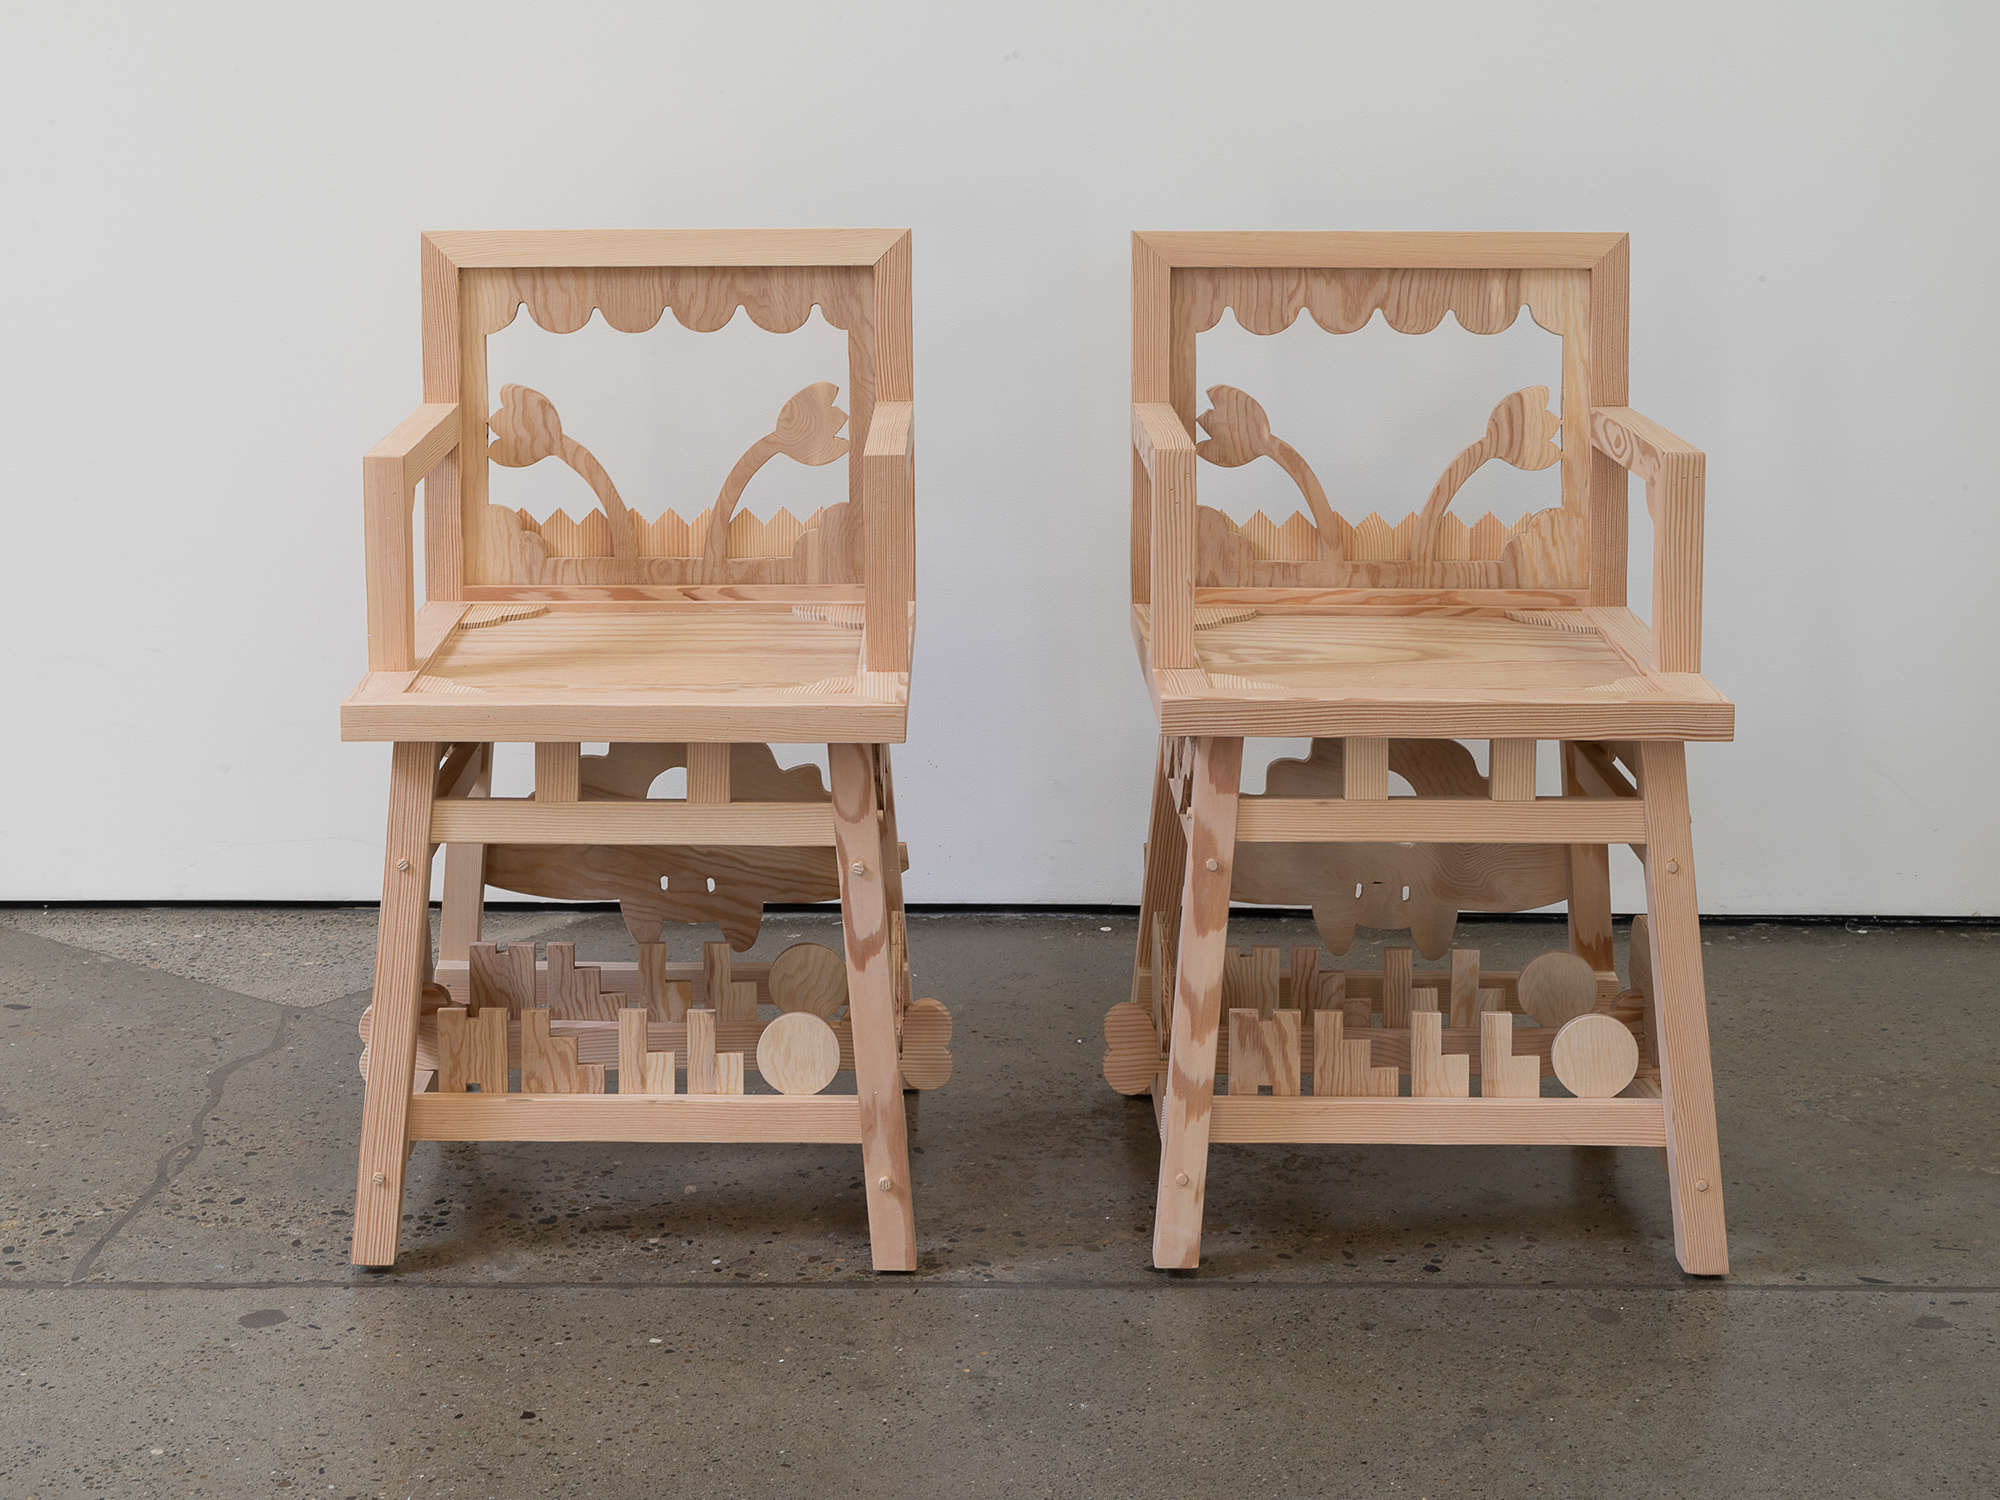 Jeffry Mitchell, Chairs, 2019